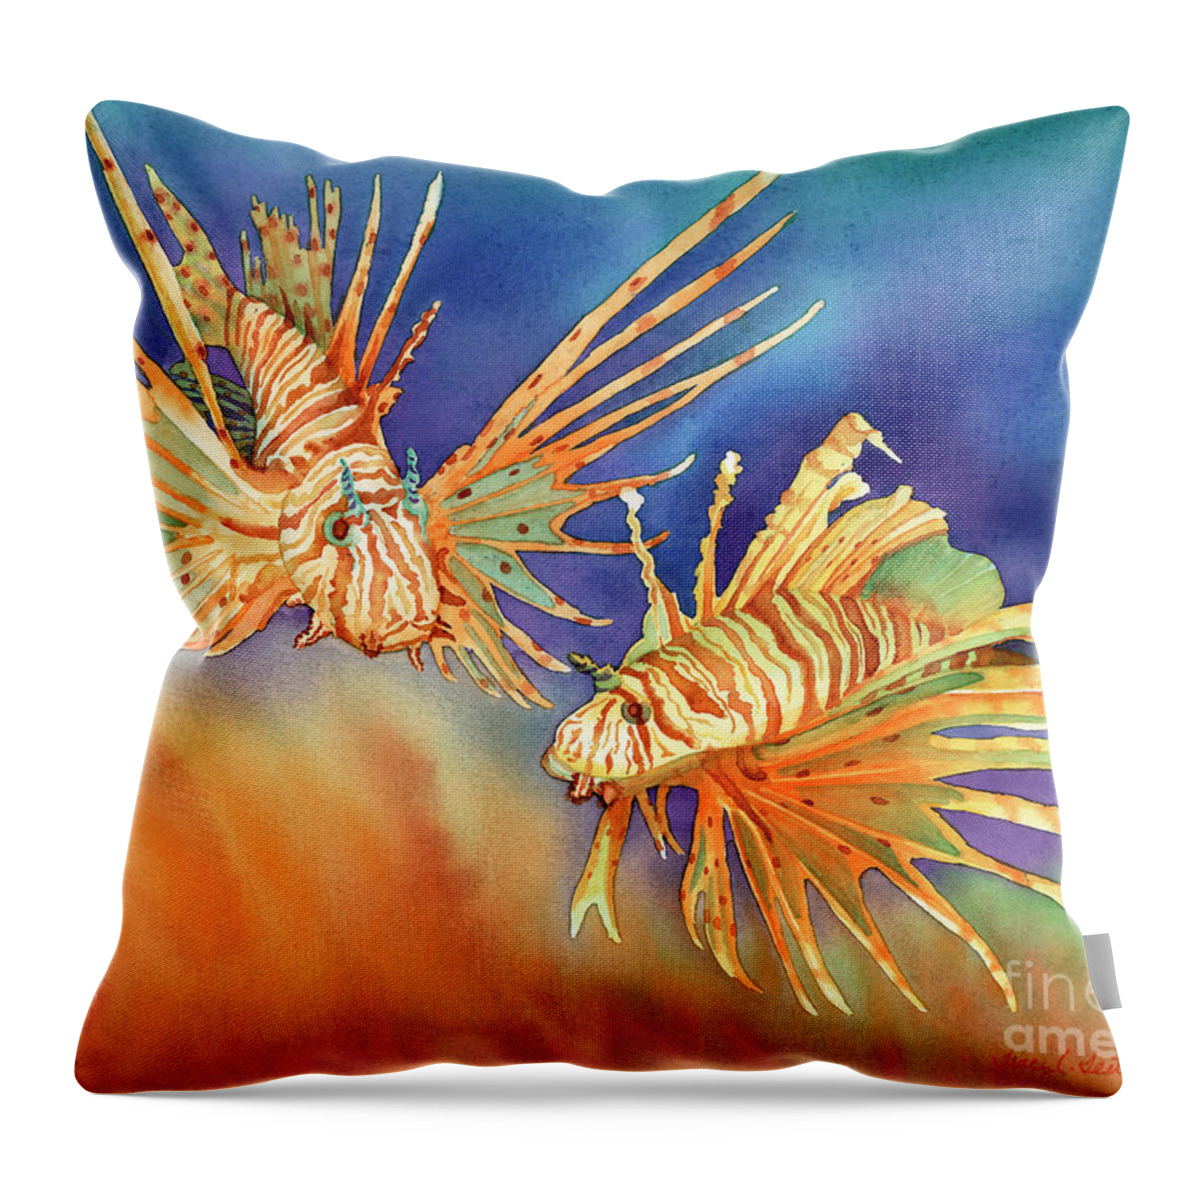 Lionfish Throw Pillow featuring the painting Ocean Lions by Tracy L Teeter 